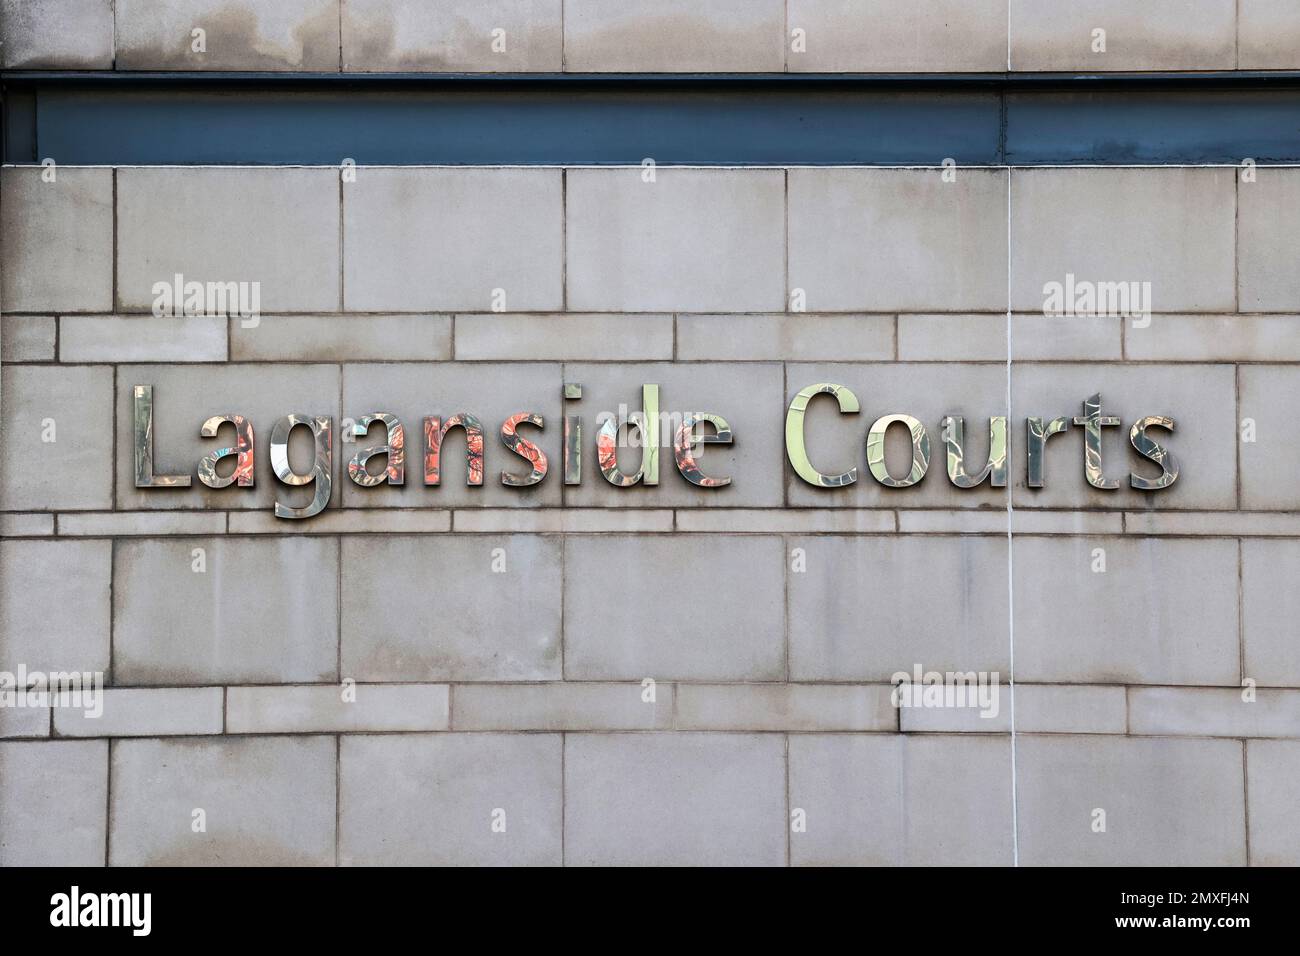 Laganside Courts Belfast – wall-mounted metal mirrored court sign for “Laganside Courts” on external wall entrance to court. Laganside Court sign. Stock Photo